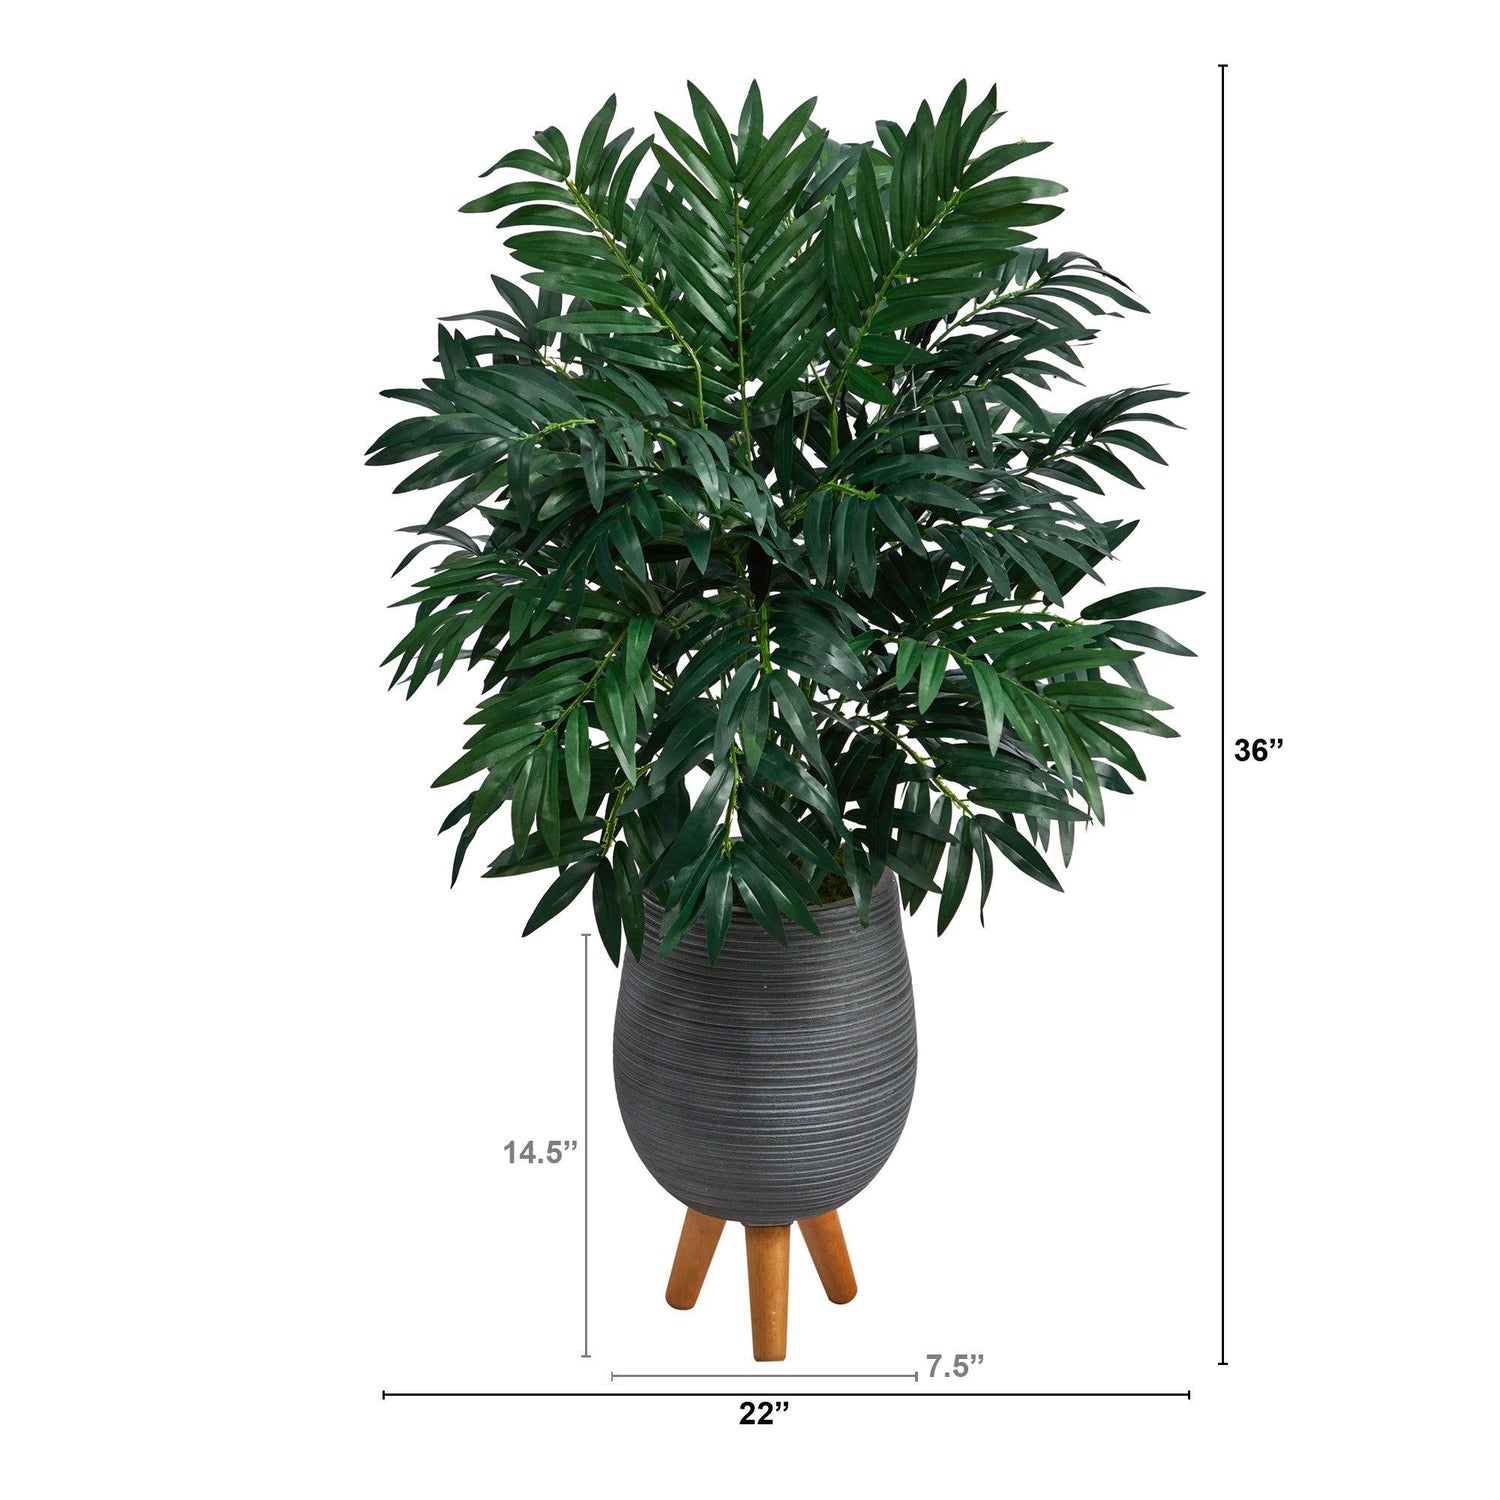 3’ Bamboo Palm Artificial Plant in Gray Planter with Stand